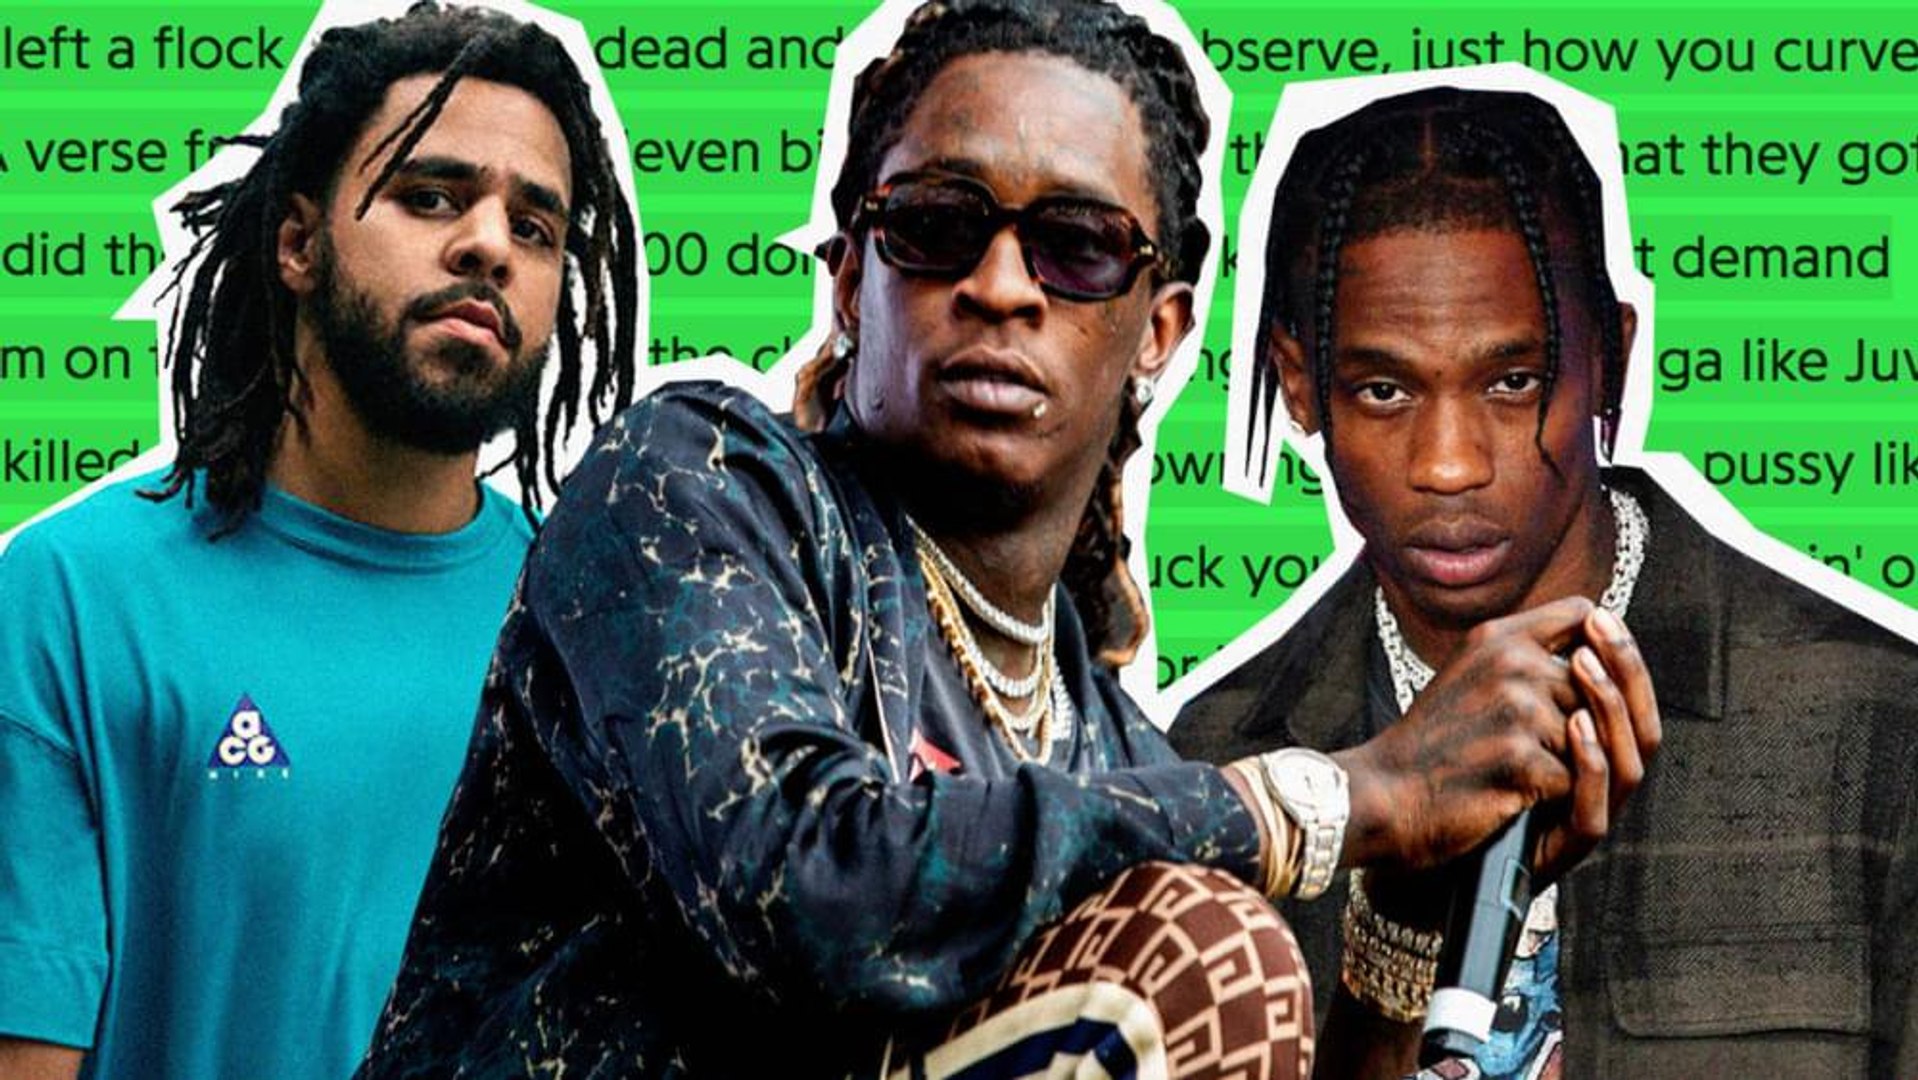 Young Thug, Travis Scott & J. Cole’s “The London” Explained